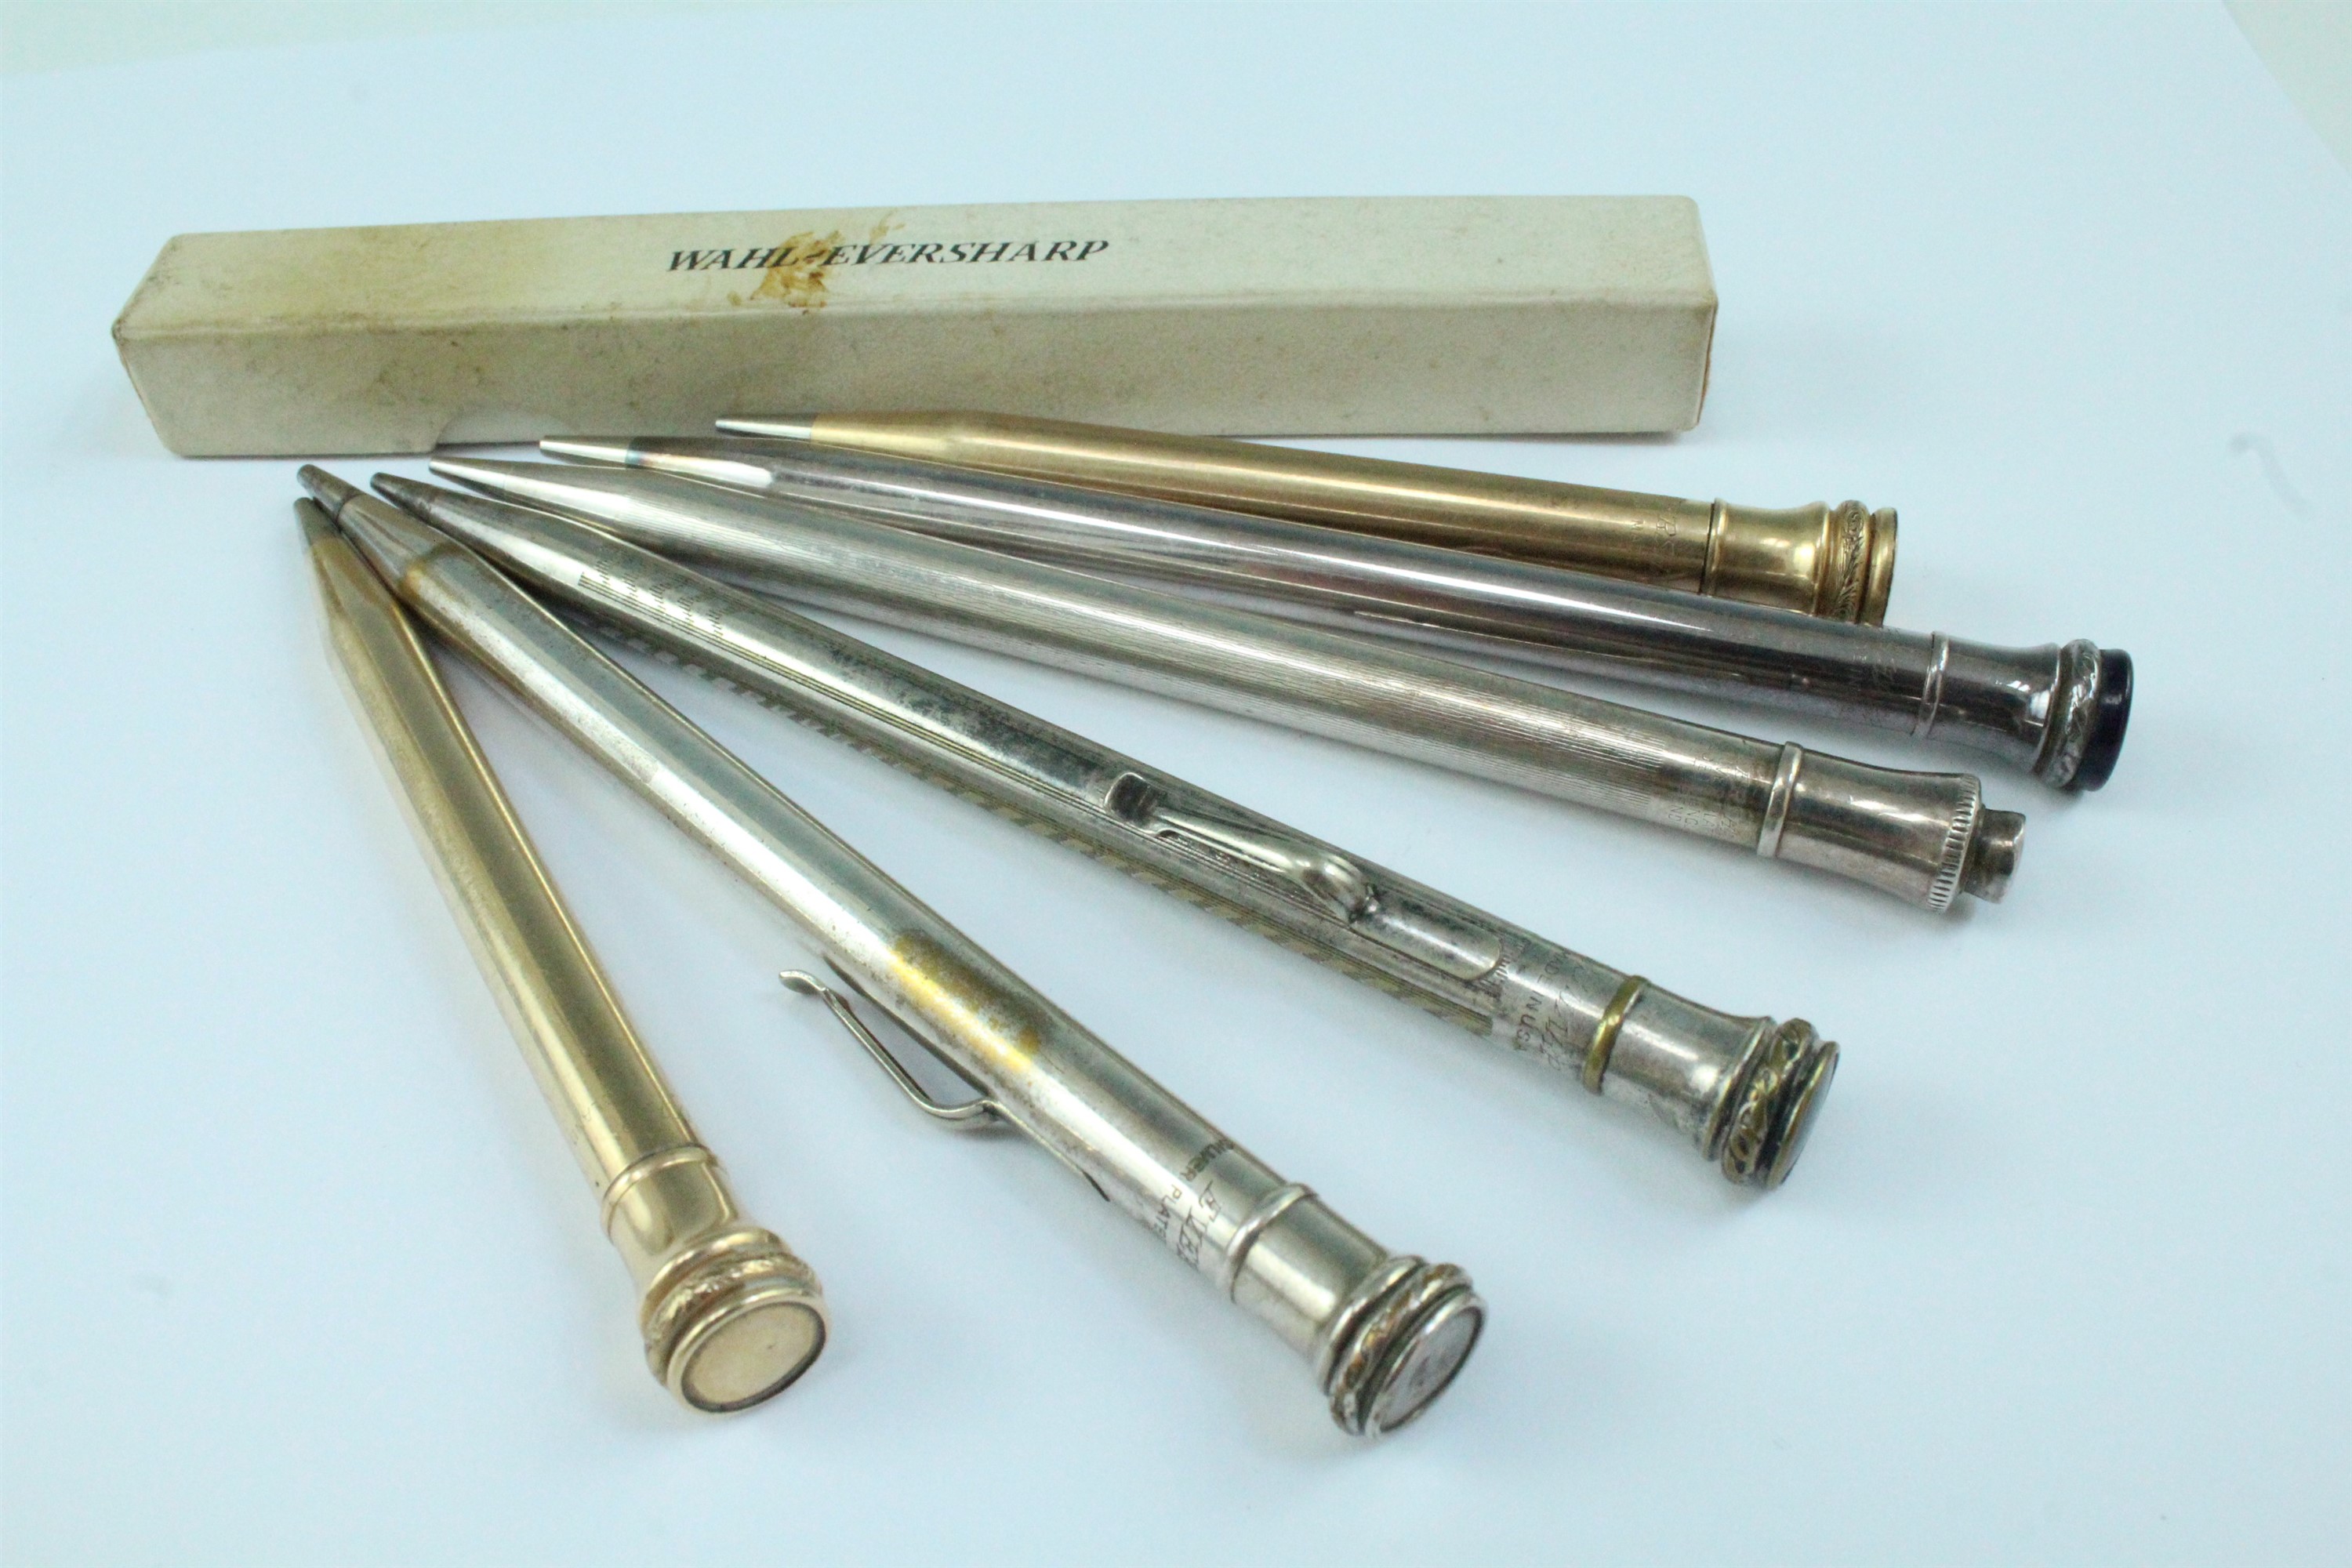 Six 'Eversharp' electroplated propelling pencils, one with box and instructions